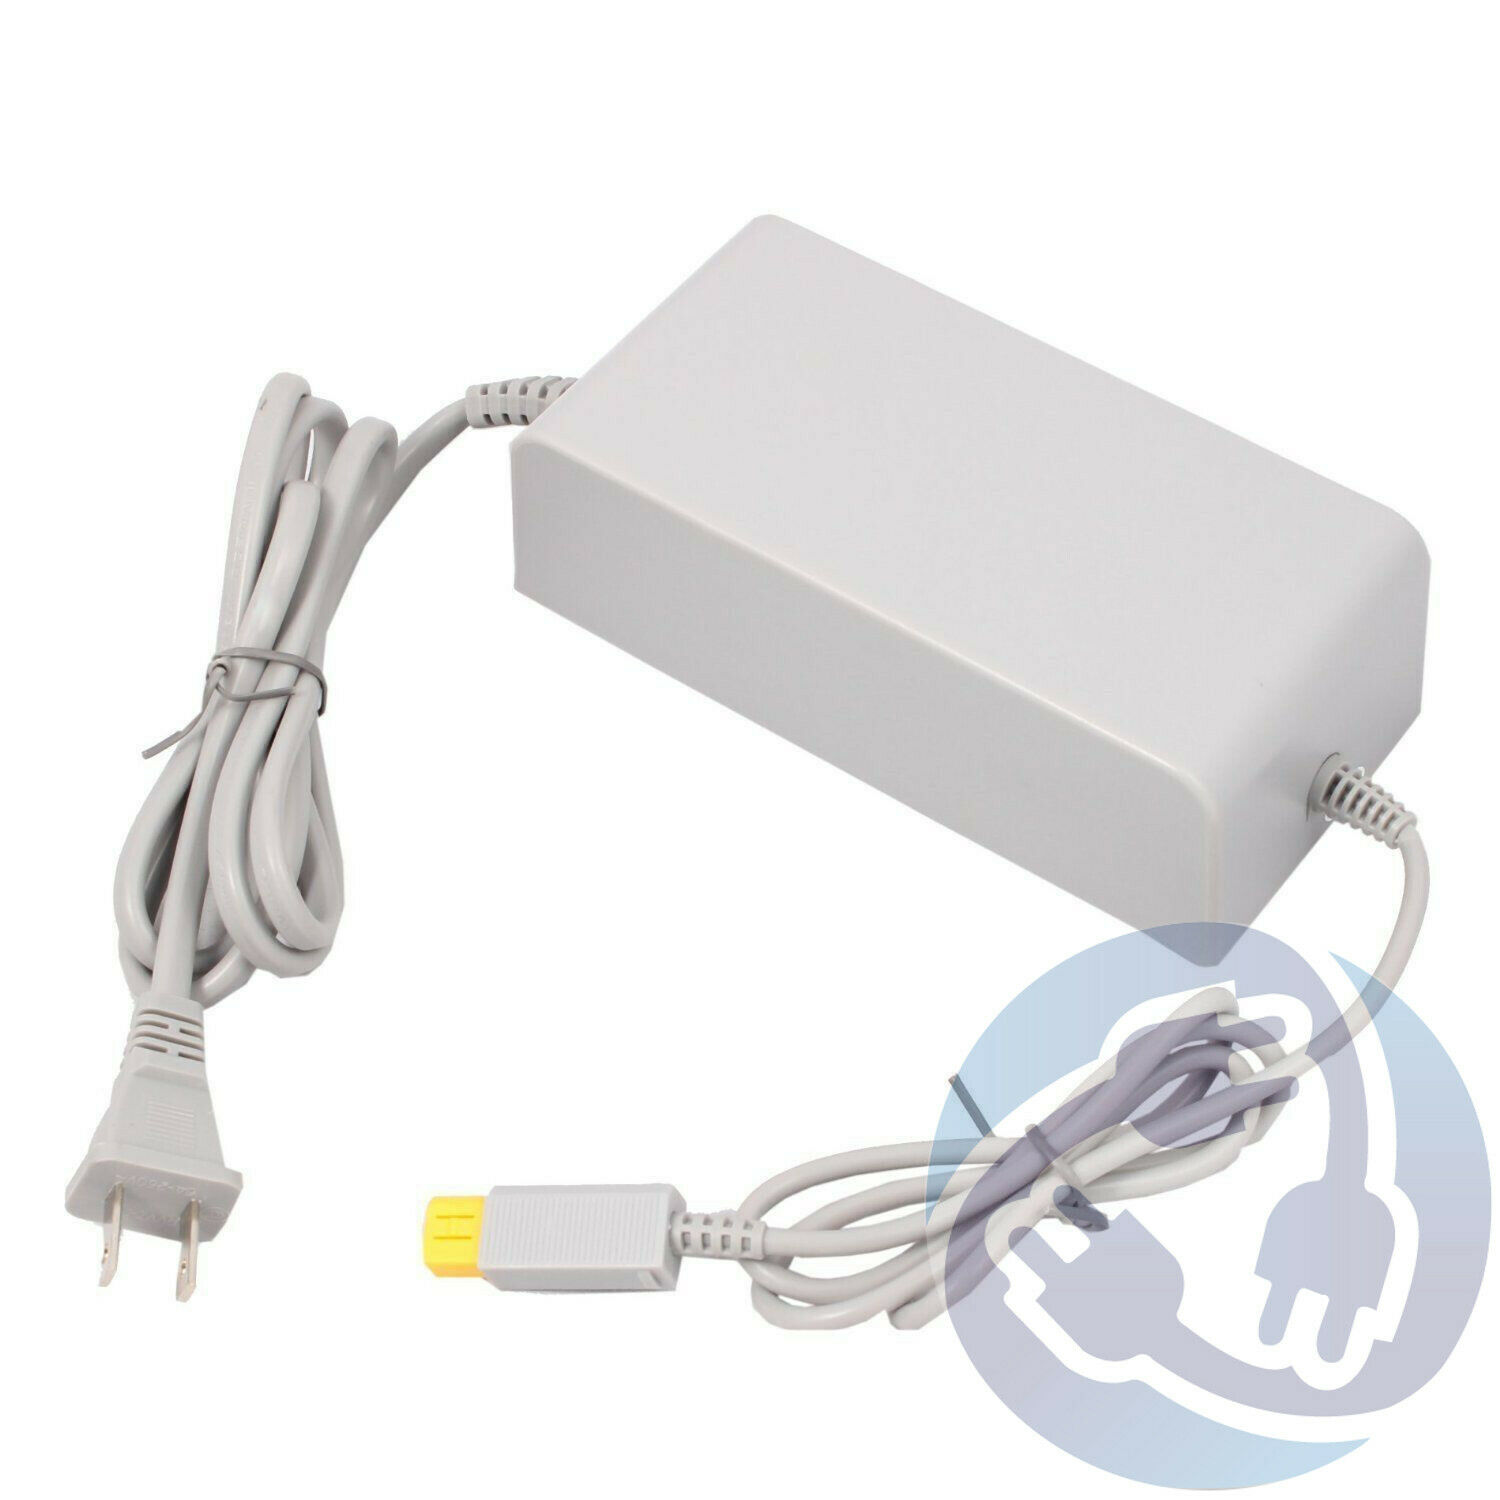 Replacement AC Wall Adapter Power Supply Charger Plug For Nintendo Wii U Console Type: Power Adapter MPN: Does Not A